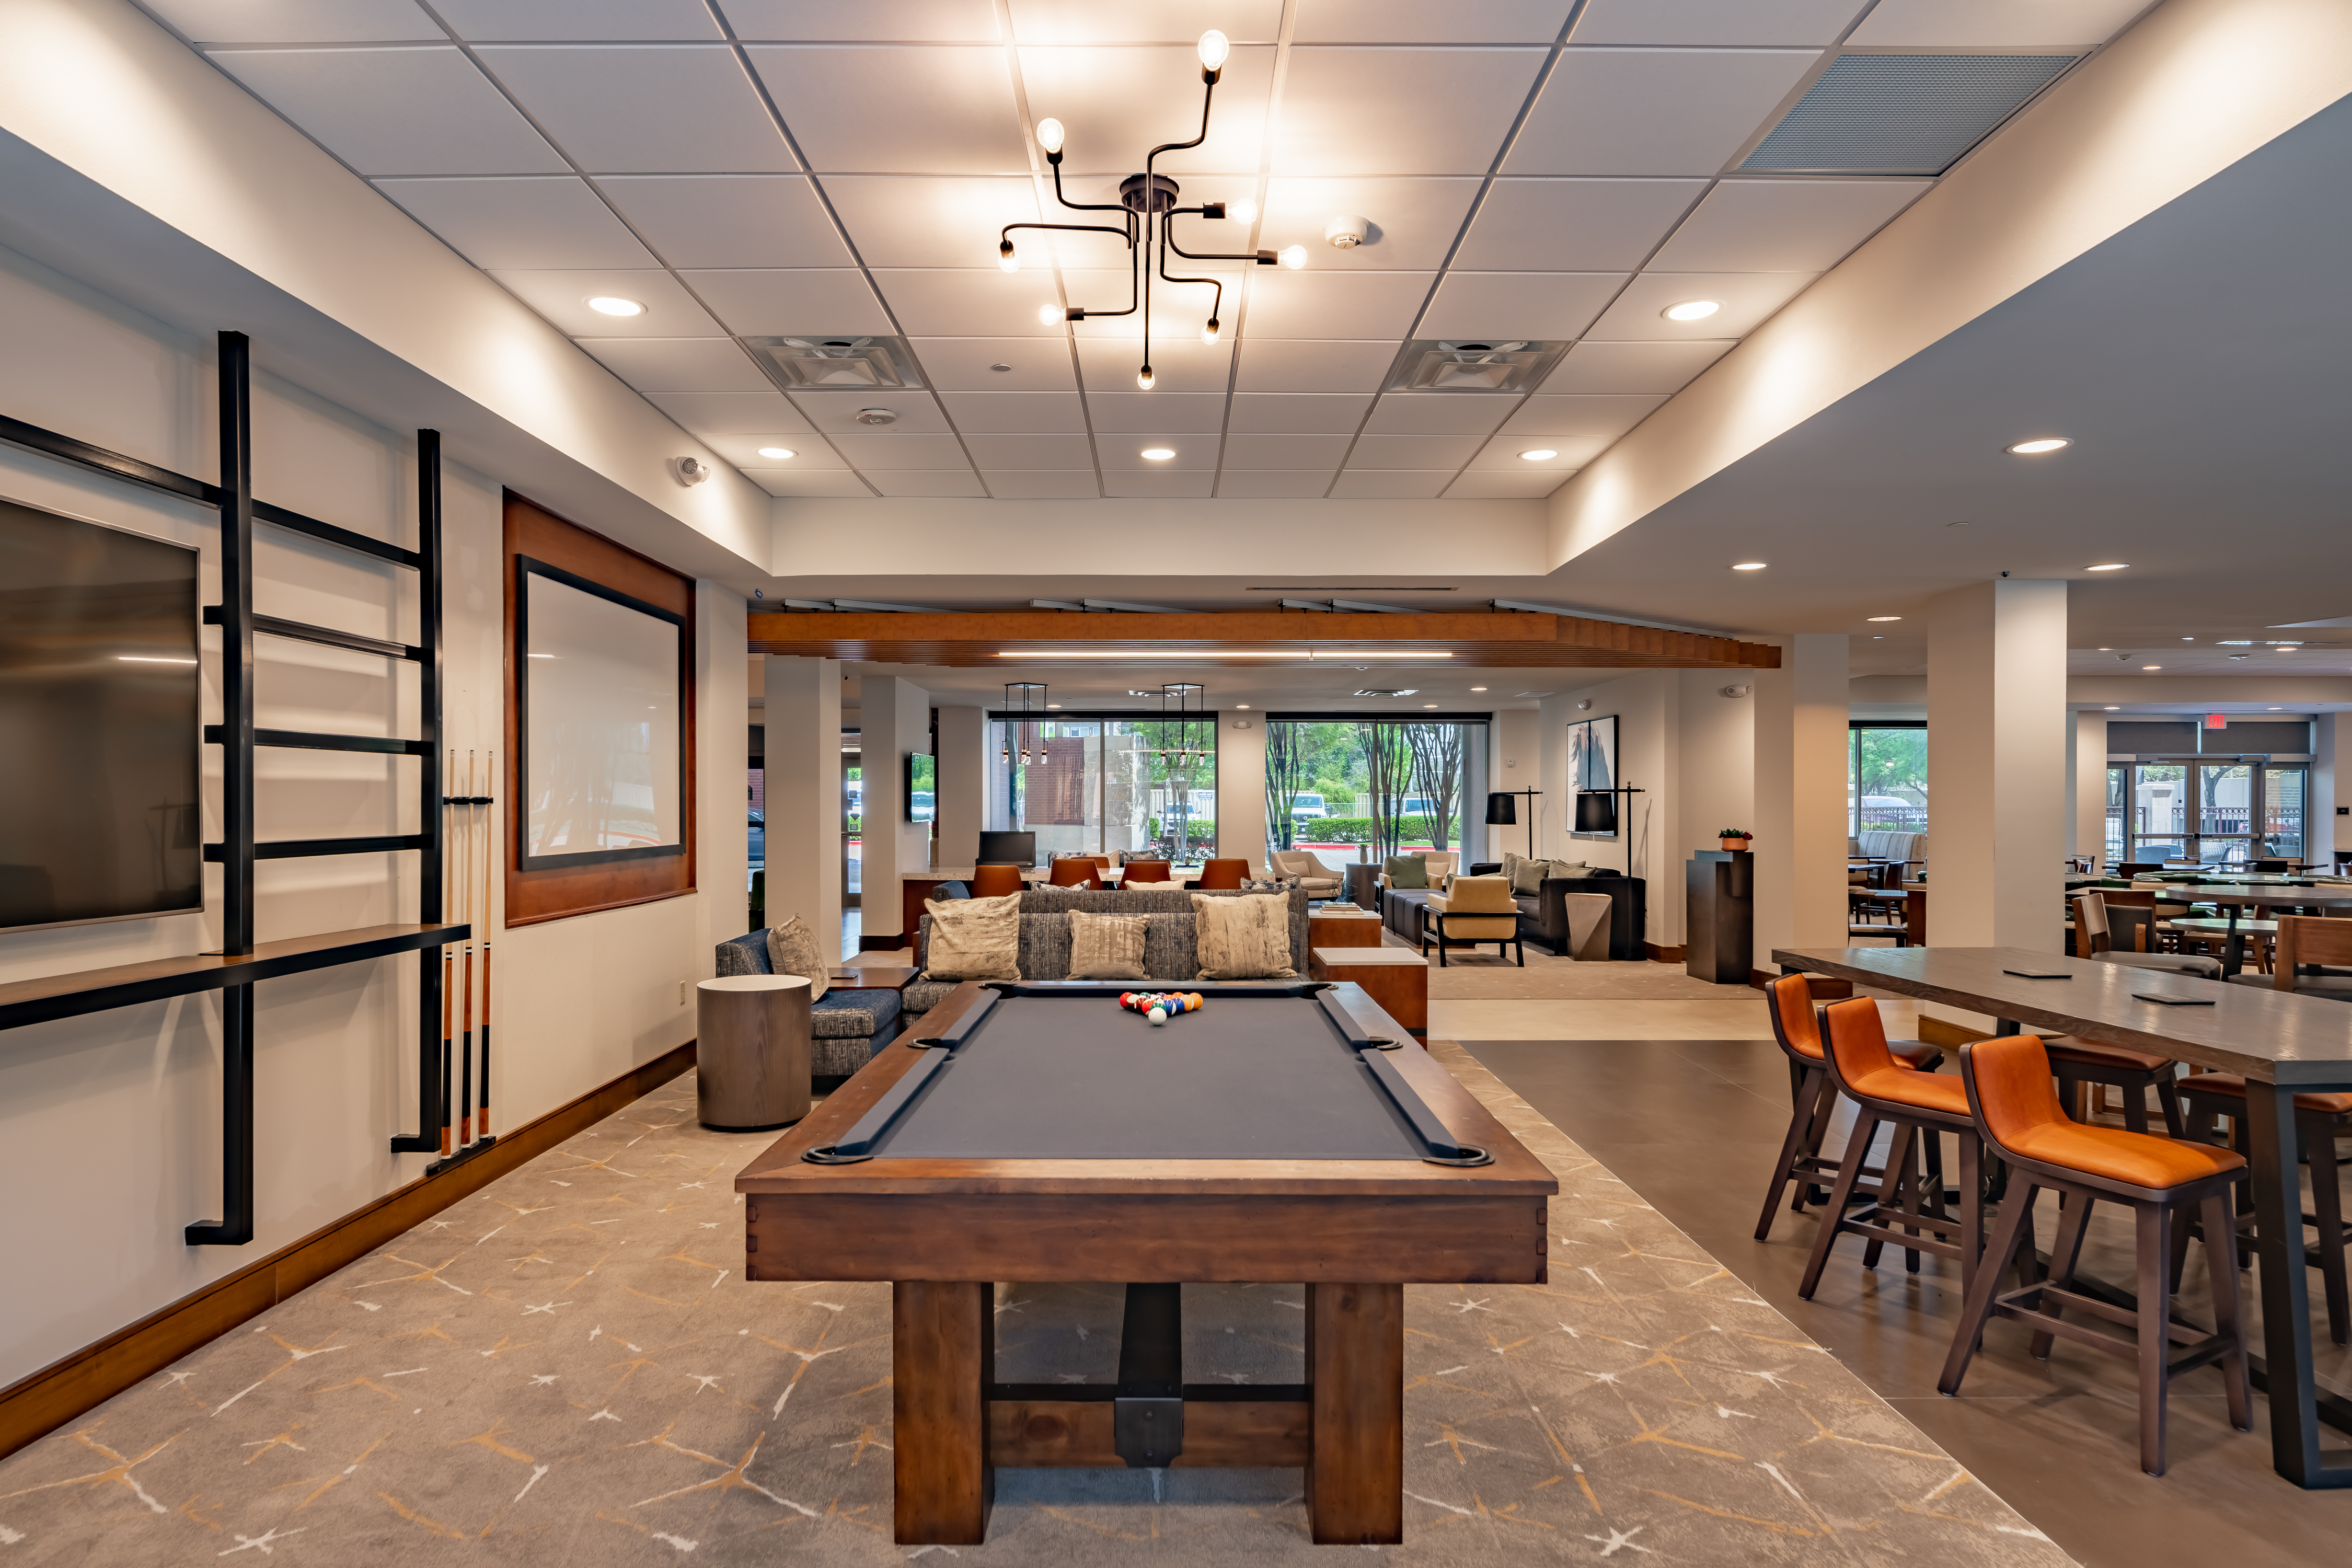 Pool Table and Lounge Seating in Lobby